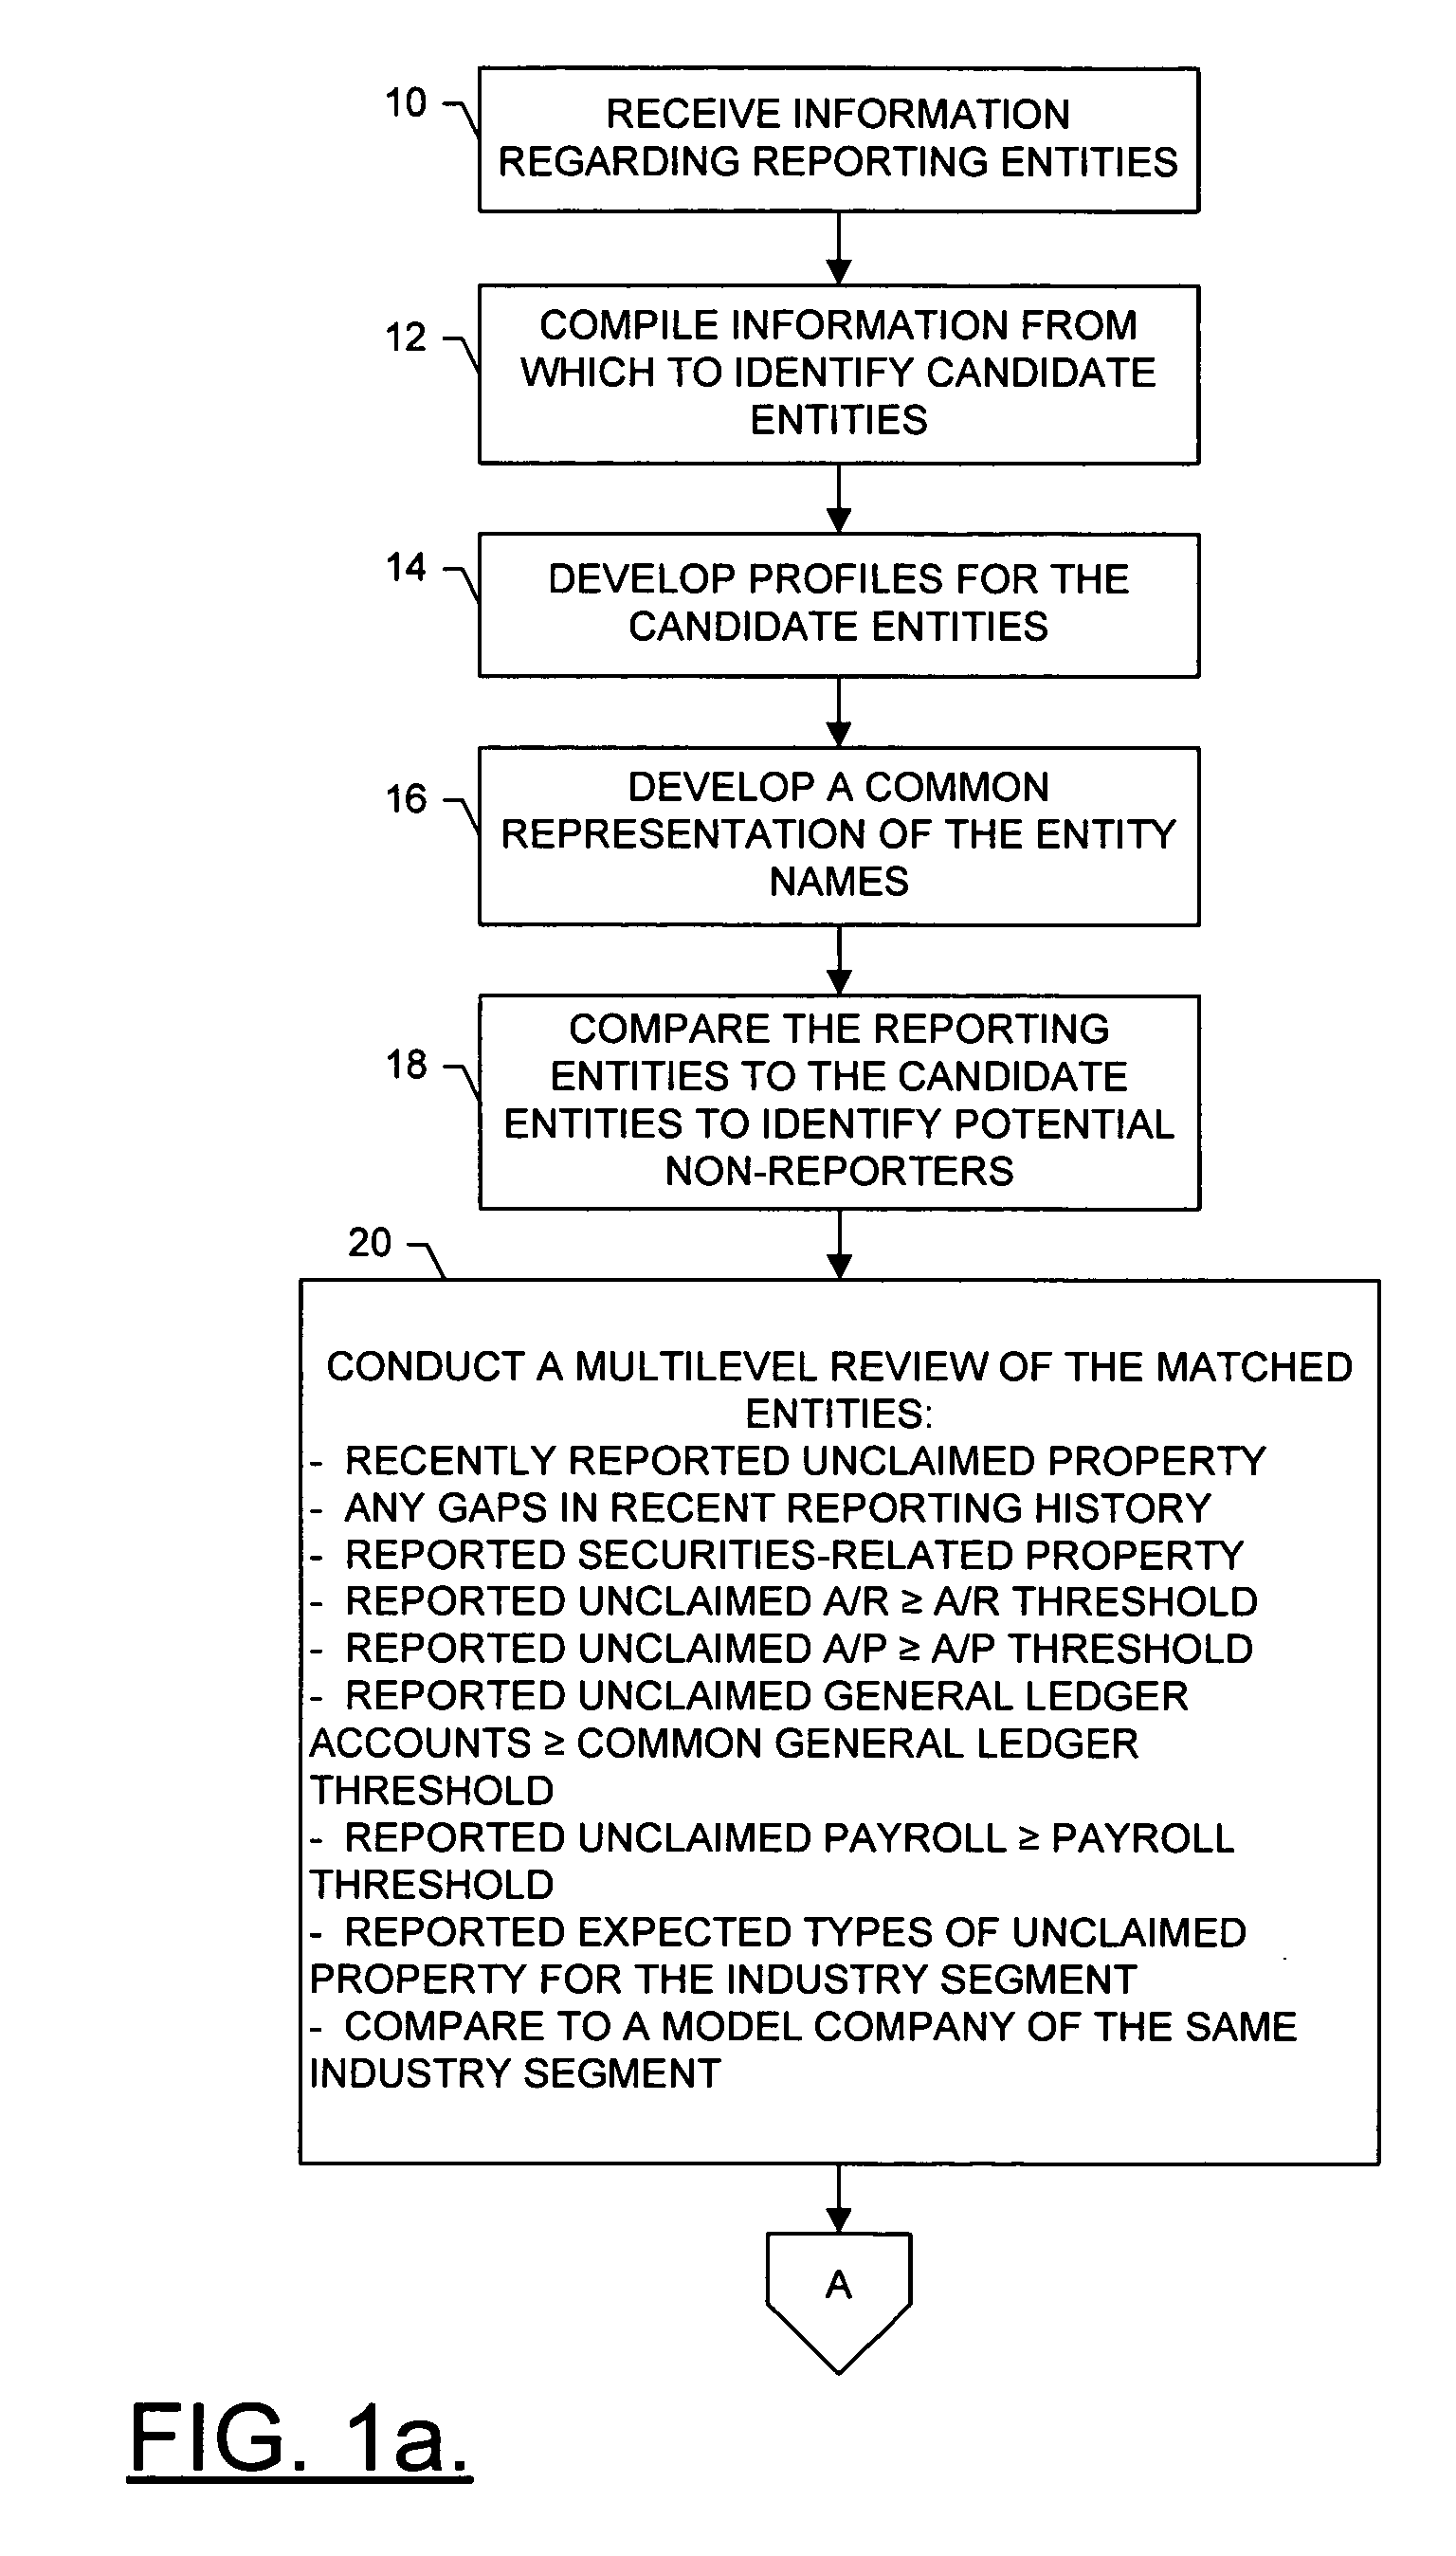 Method and system of identifying potential under reporters to monitor compliance in reporting unclaimed property